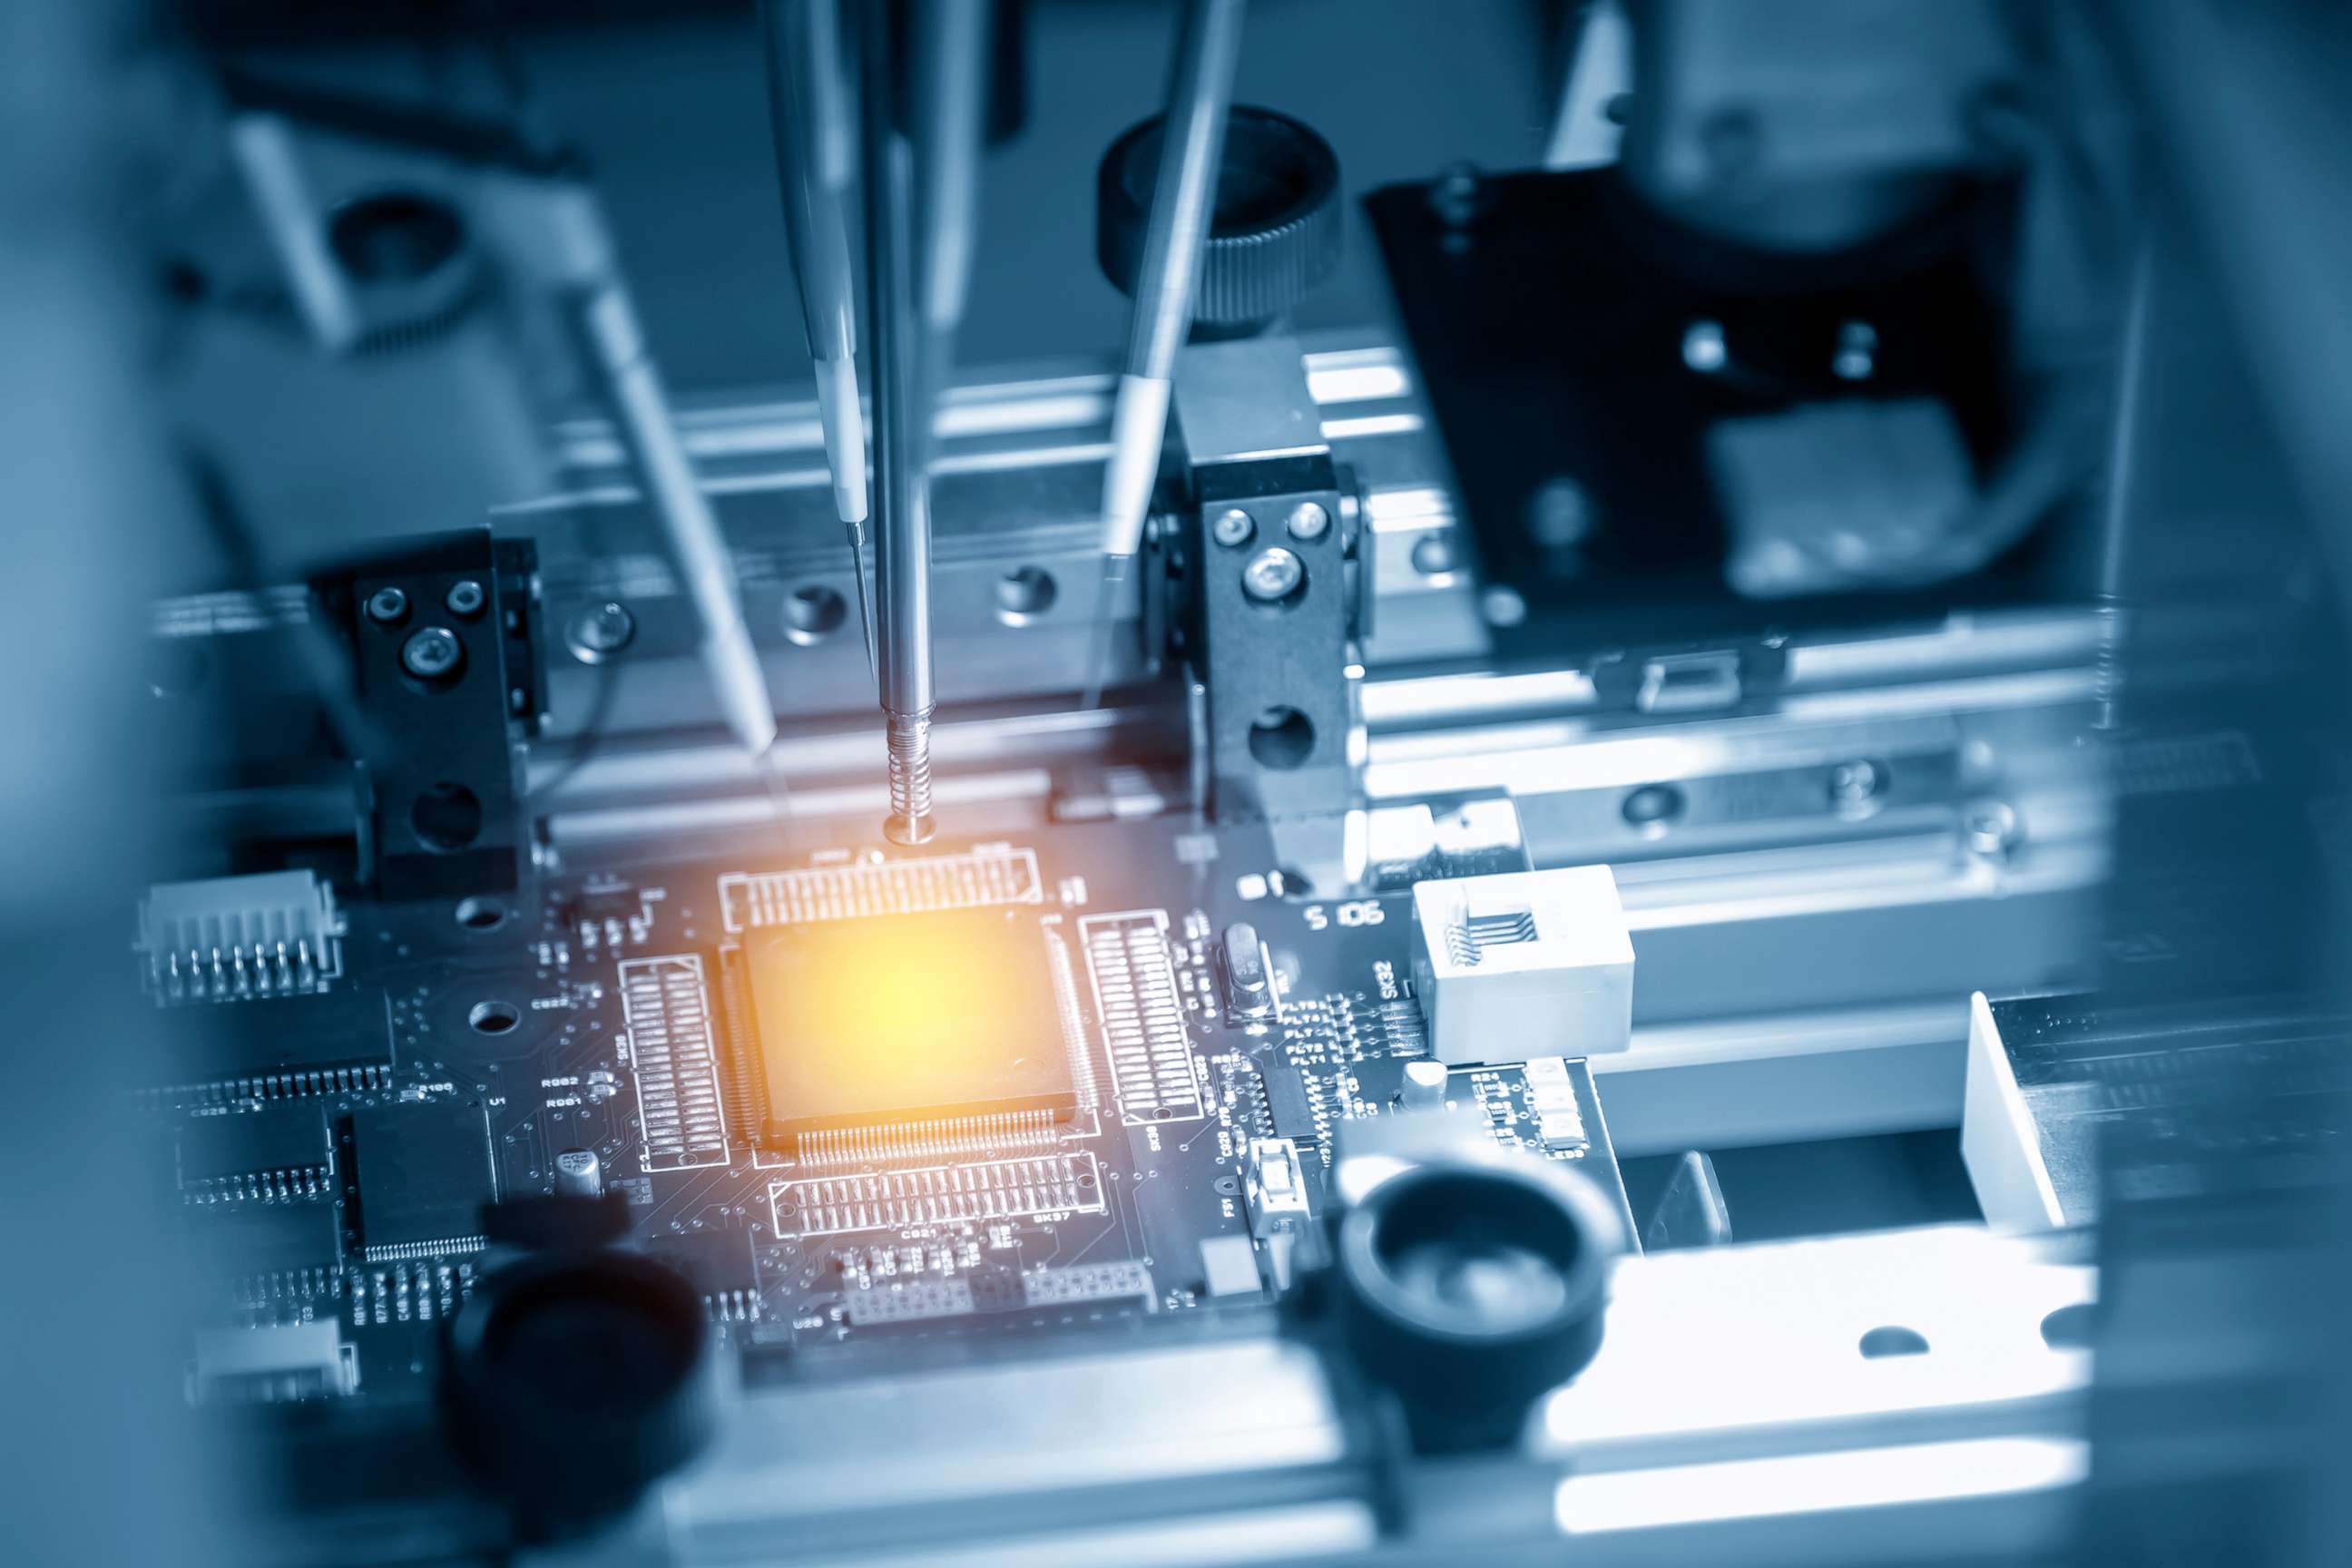 PHOTO: A microchip is illuminated on the main board in the assembly line in an undated stock image.